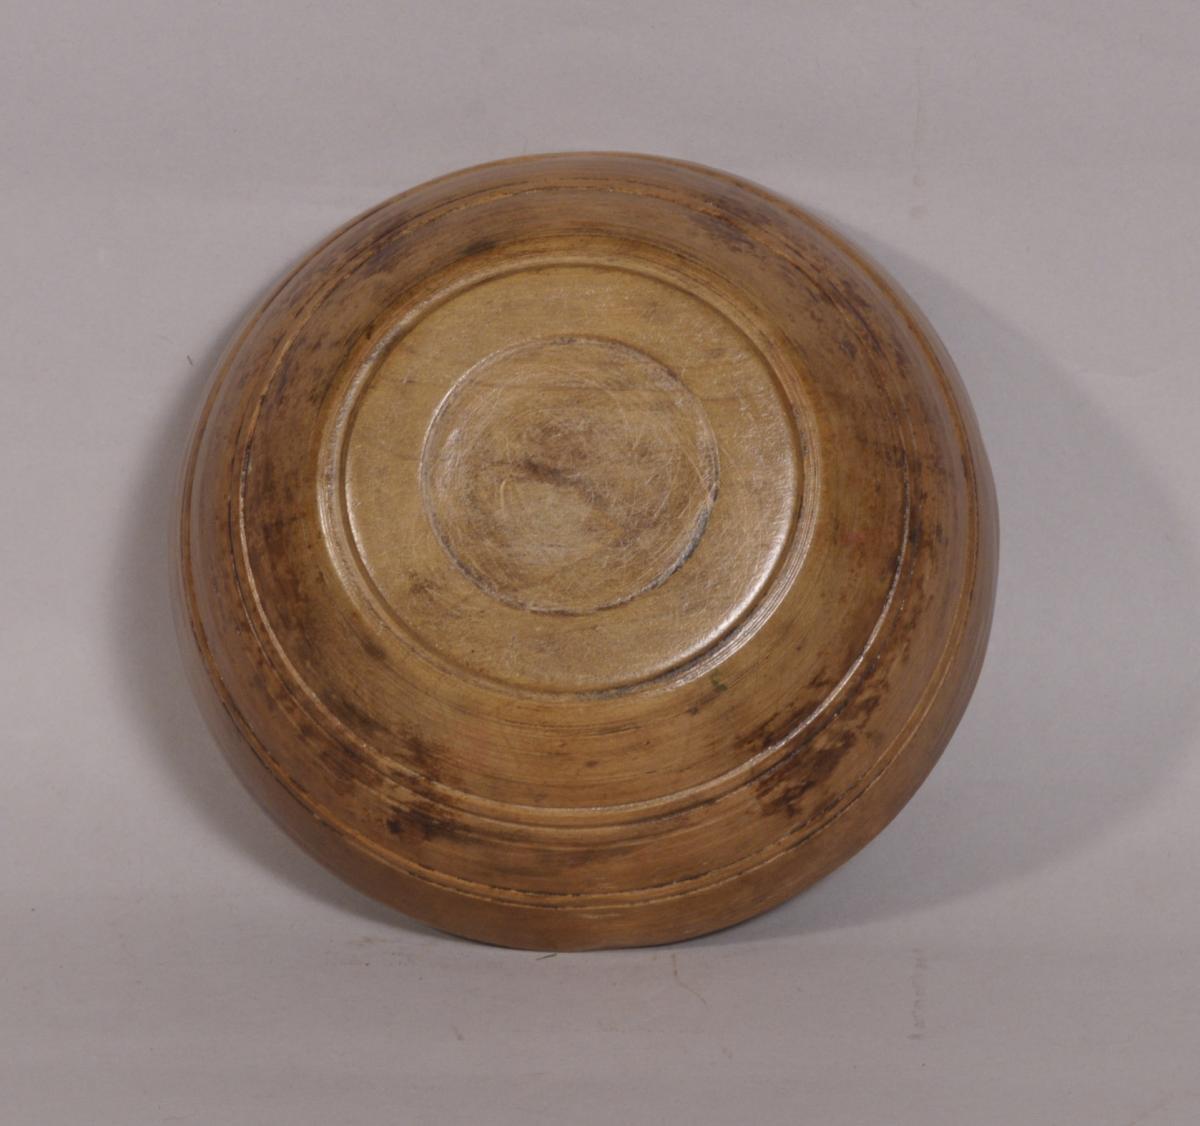 S/3785 Antique Treen 19th Century Sycamore Food Bowl